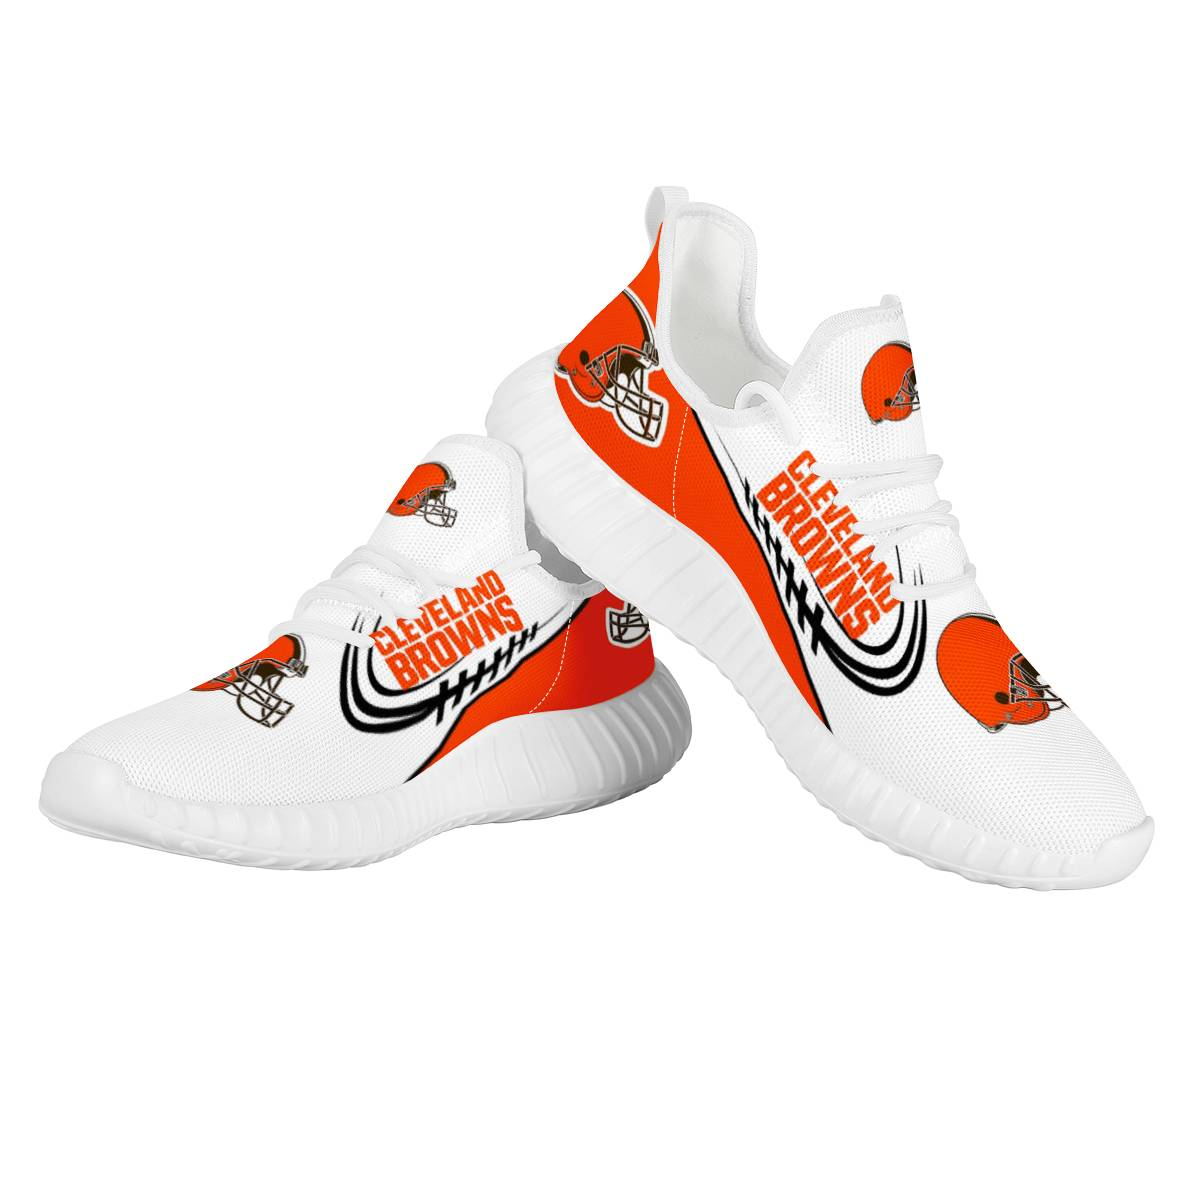 Women's Cleveland Browns Mesh Knit Sneakers/Shoes 005